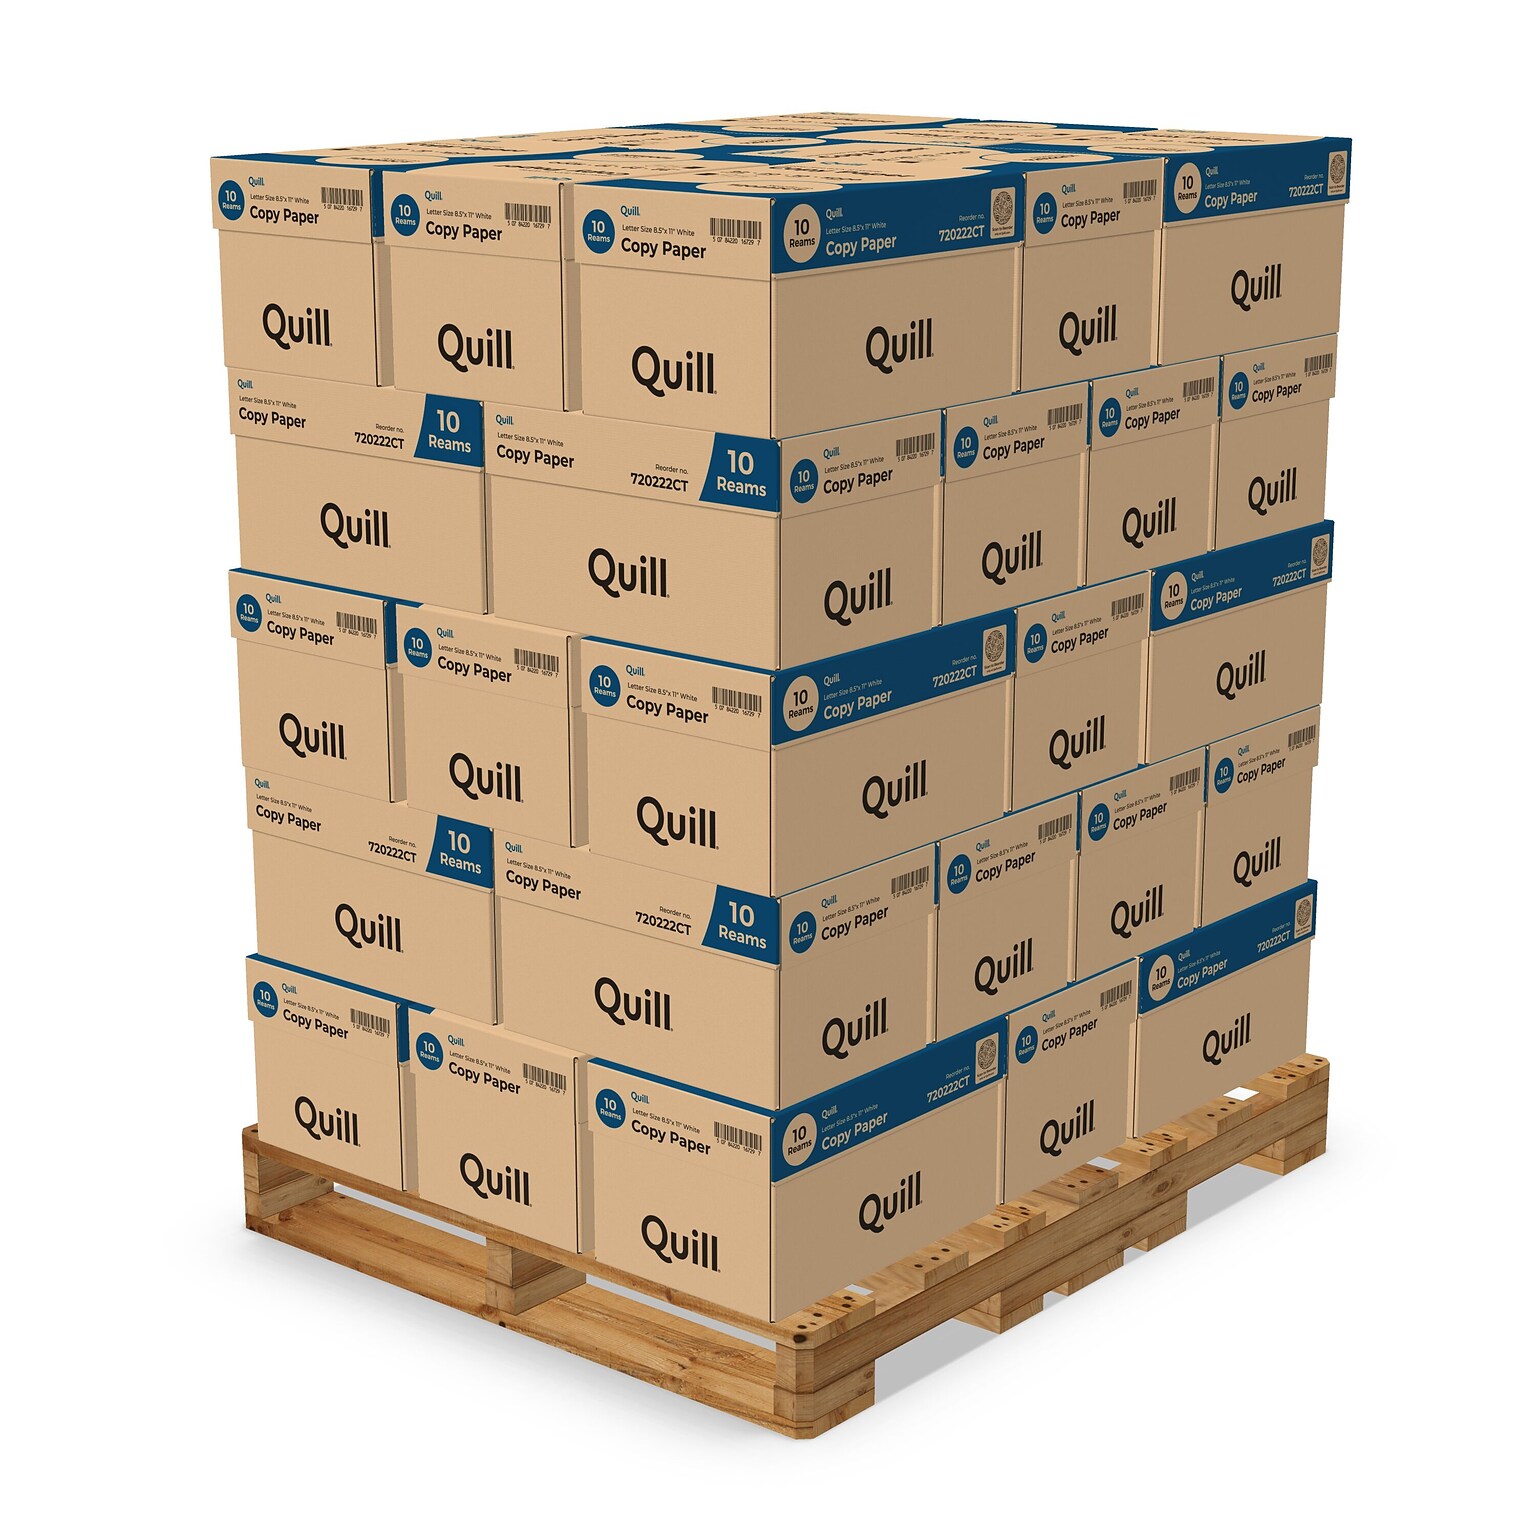 Quill Brand® 8.5 x 11 Copy Paper by the Pallet, 20 lbs., 92 Brightness, 6-8 Pallets (720222)